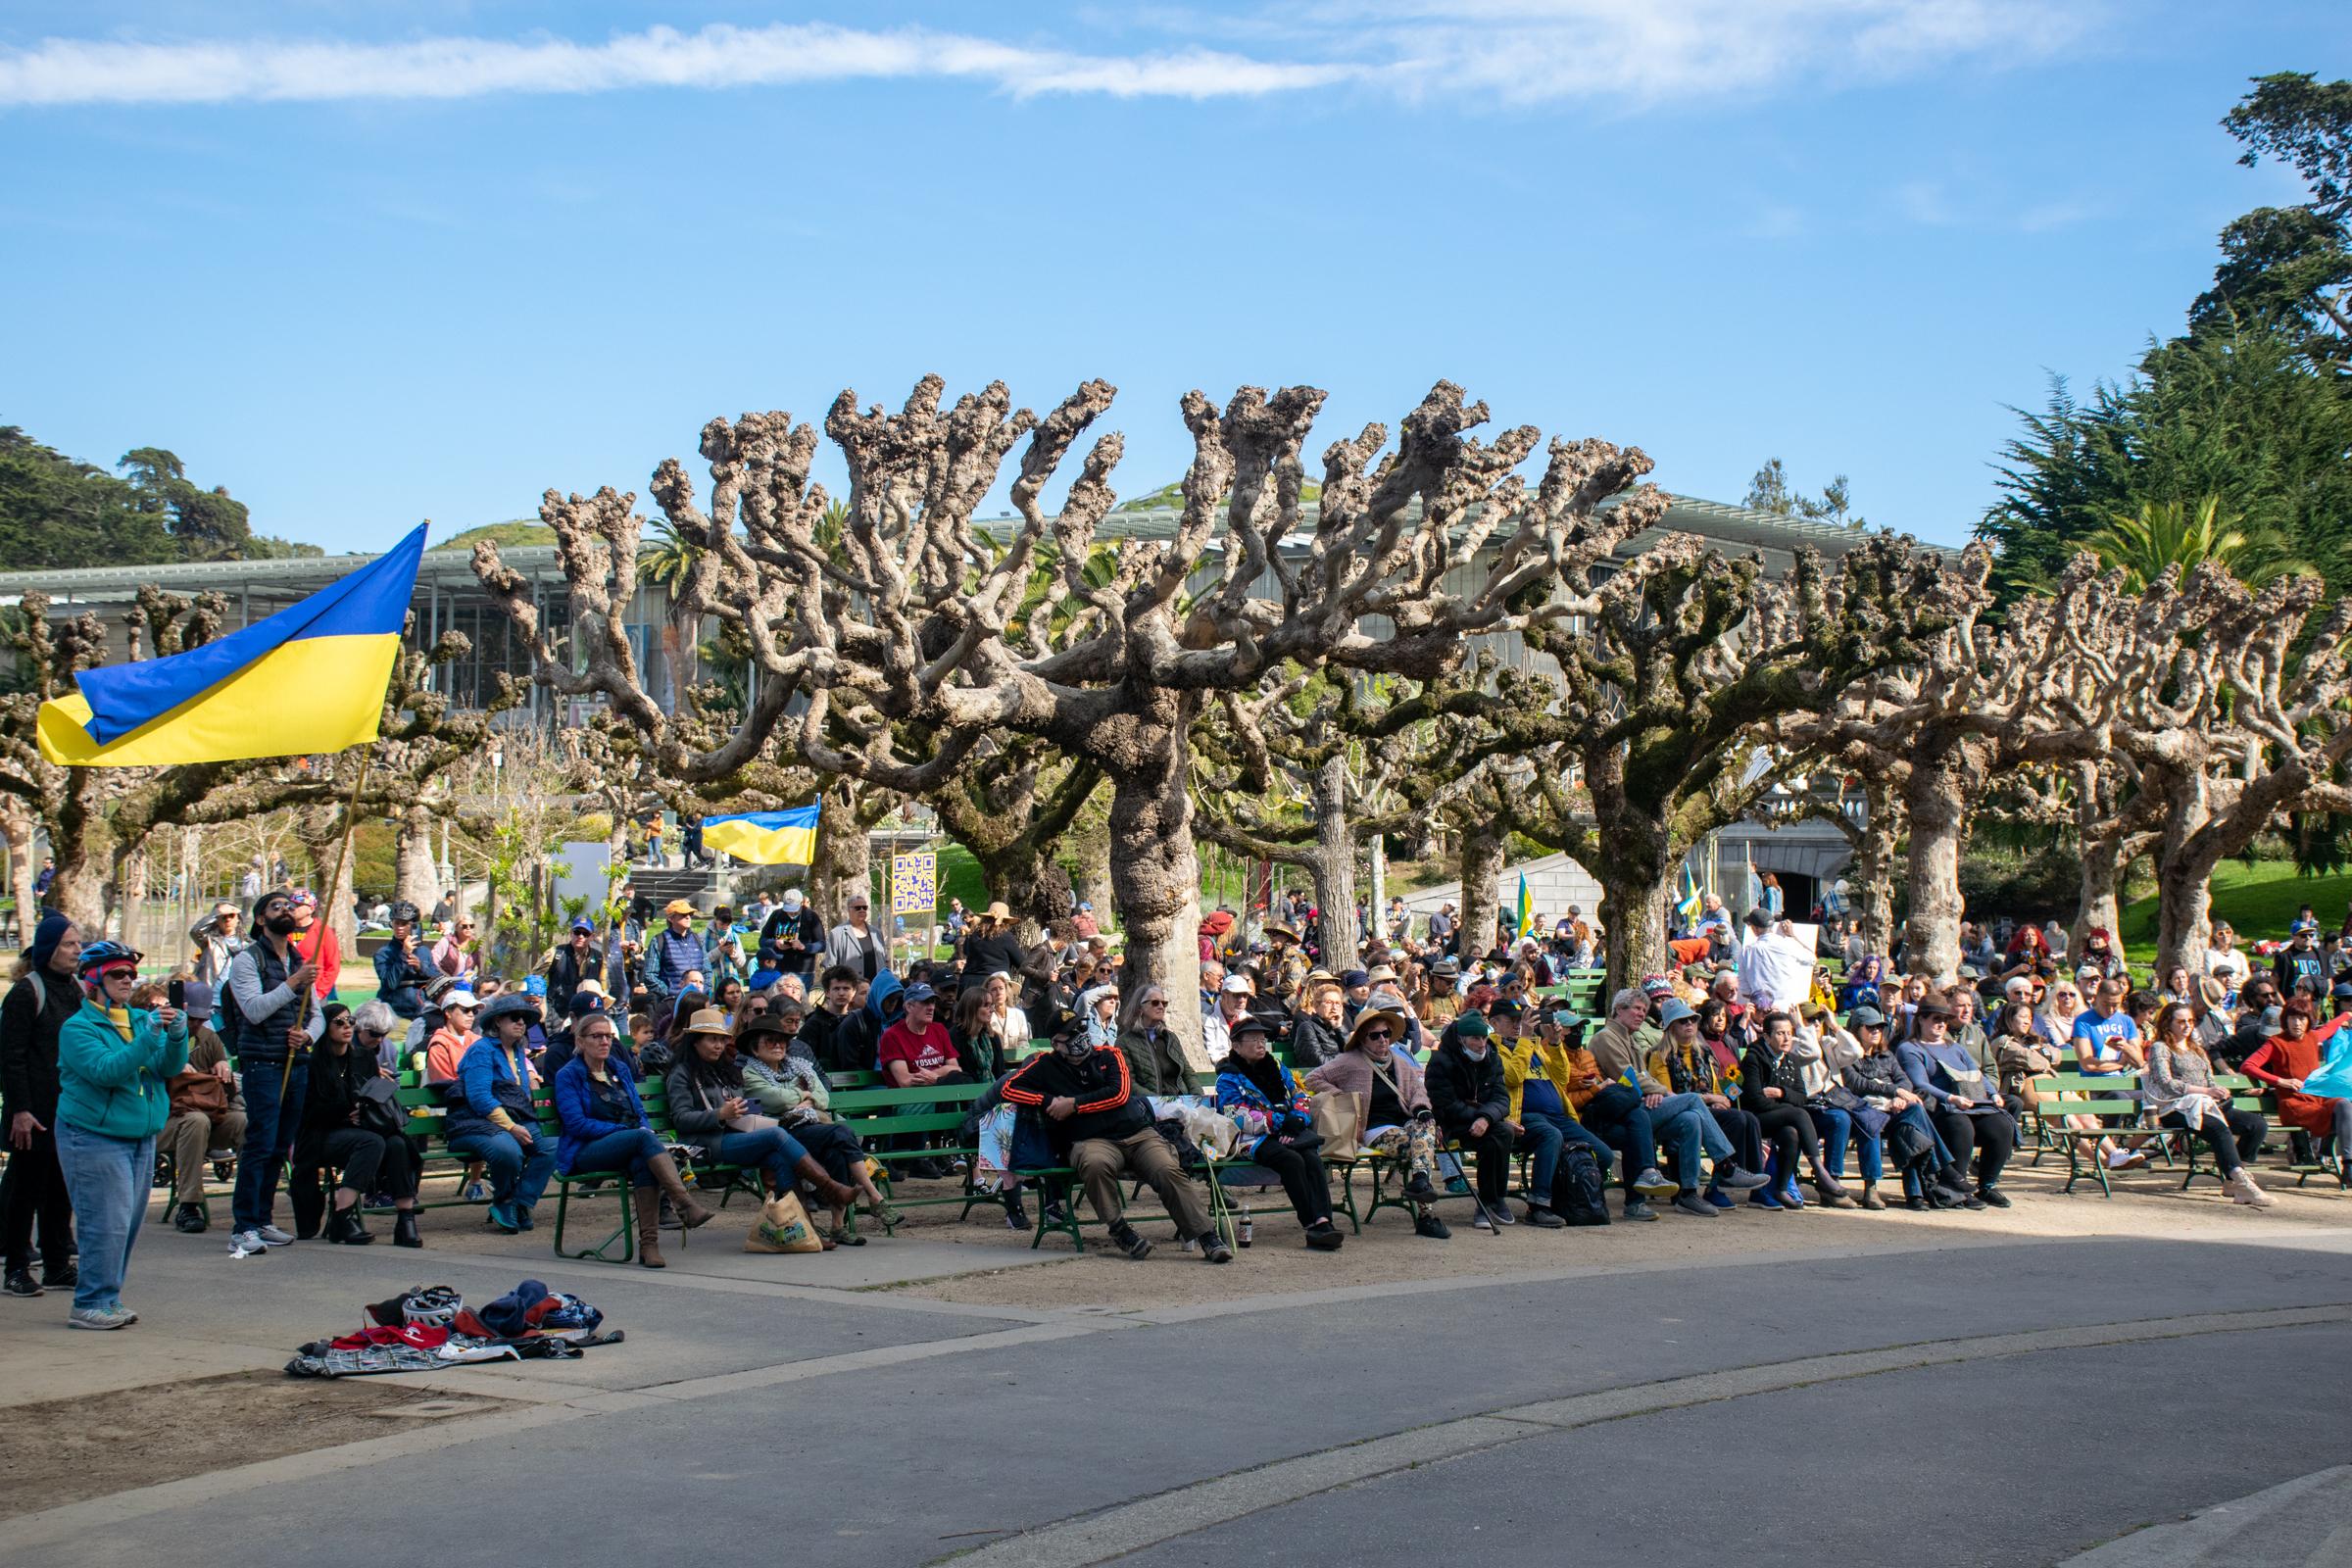  People gather at the Music Concourse in Golden Gate Park during the benefit concert in support of Ukraine. San Francisco, March 12, 2022 (Karem...